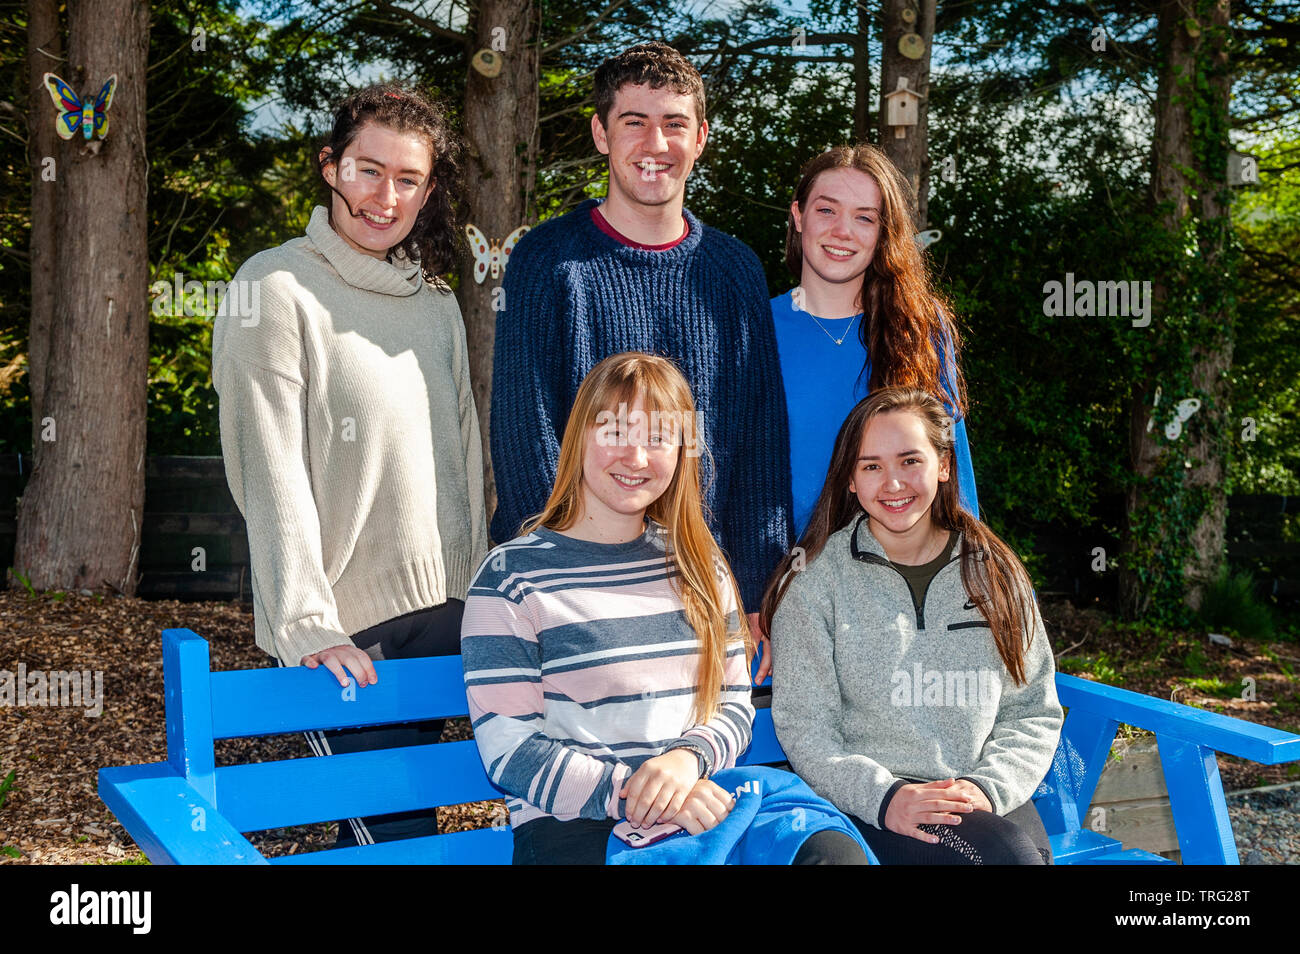 Schull, West Cork, Ireland. 5th June, 2019. The Leavingand Junior Cert exams started today for over 120,000 students in Ireland. English was the first Leaving Cert paper, followed by Home Economics. Preparing to sit their first Leaving Cert exam were Aoife Quinn, Skibbereen; Rosa Lyden, Baltimore; Joe Arundel McSweeney, Schull; Áine Levis, Durrus and Alyssa Chan, Schull. Credit: Andy Gibson/Alamy Live News Stock Photo